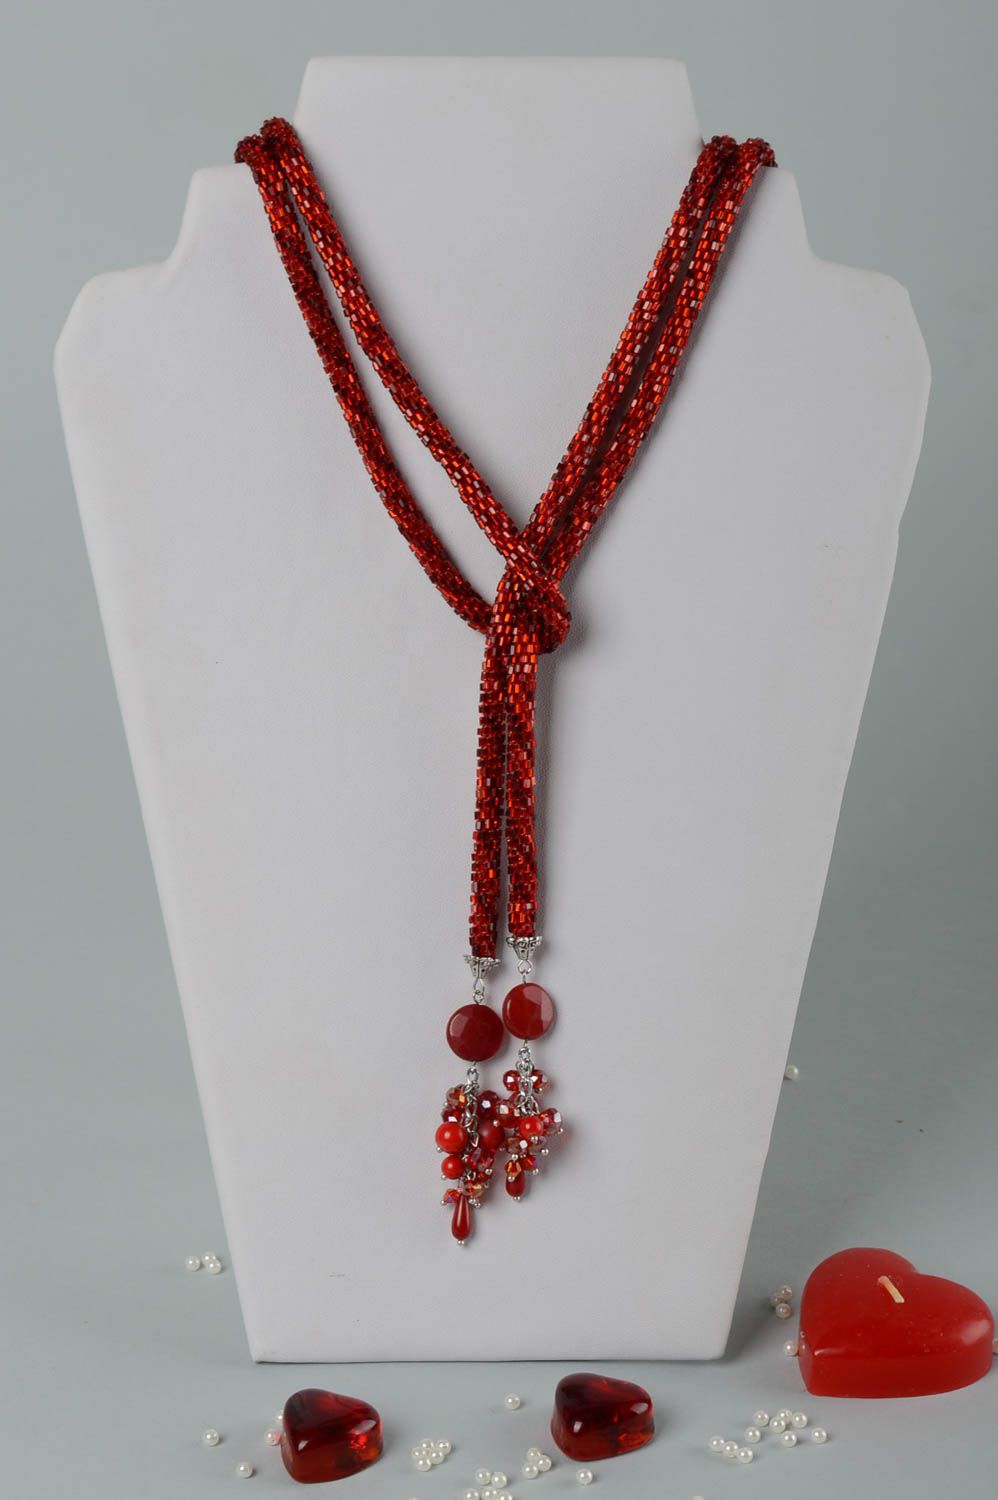 Unusual handmade beaded necklace artisan jewelry designs gifts for her photo 1